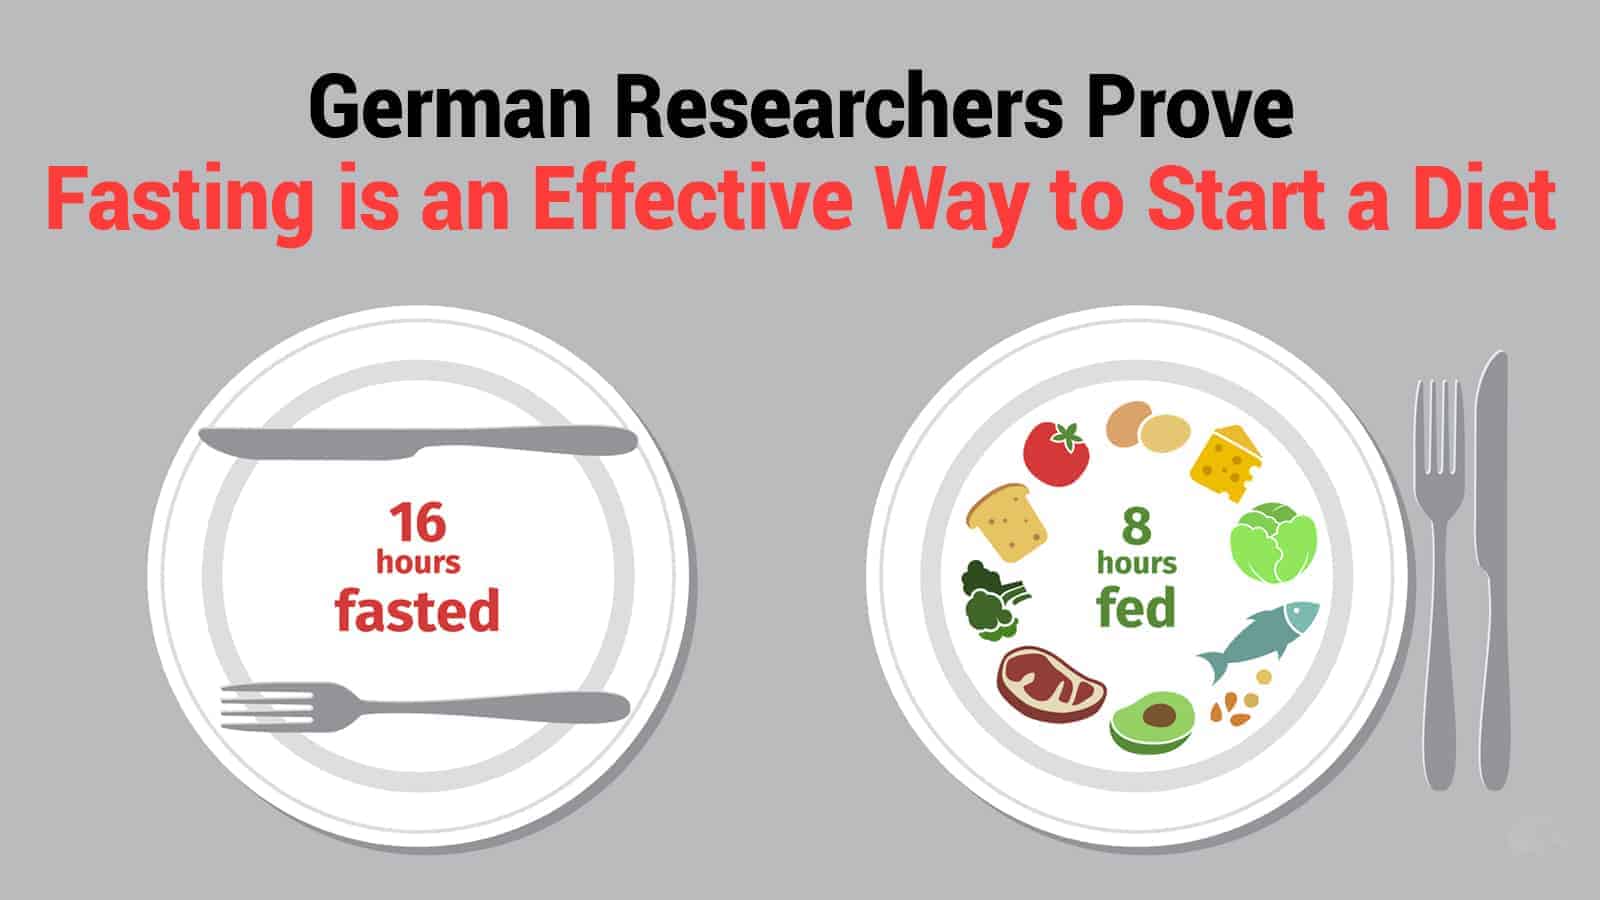 German Researchers Prove Fasting is an Effective Way to Start a Diet